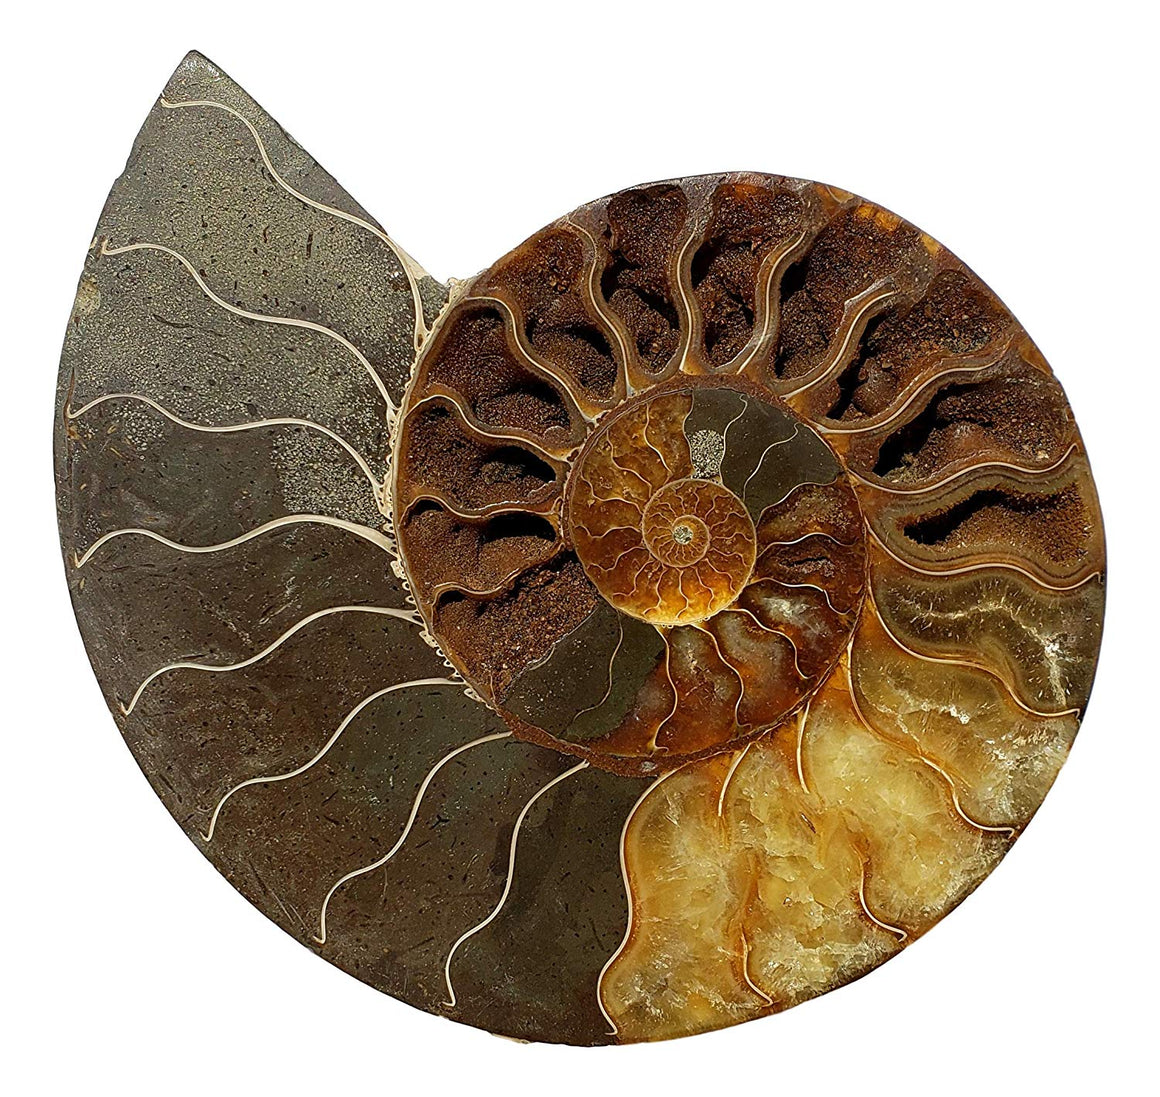 Genuine Ammonite Fossil Pair - Split and Polished - from Madagascar (9) - dinosaursrocksuperstore